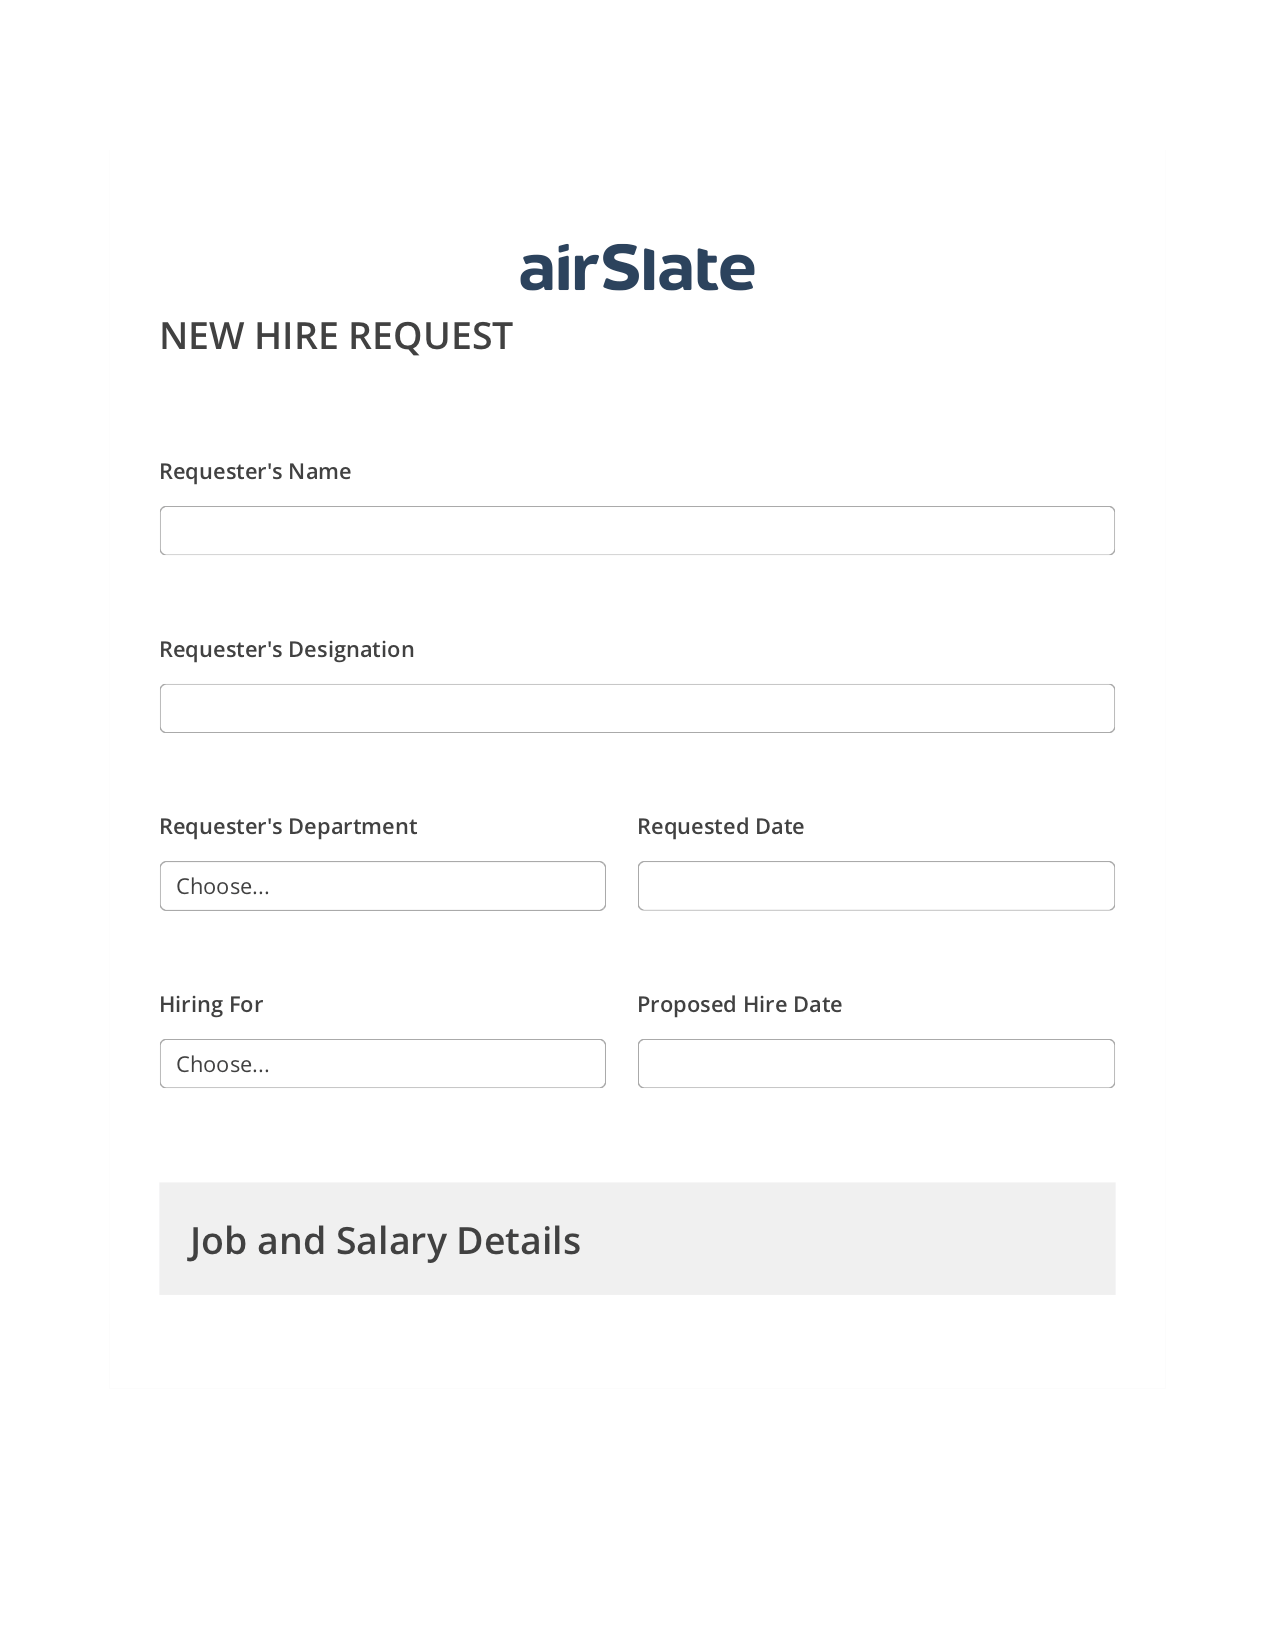 Multirole Hiring Request Workflow Prefill from NetSuite records, Text Message Notification Bot, Export to Google Sheet Bot